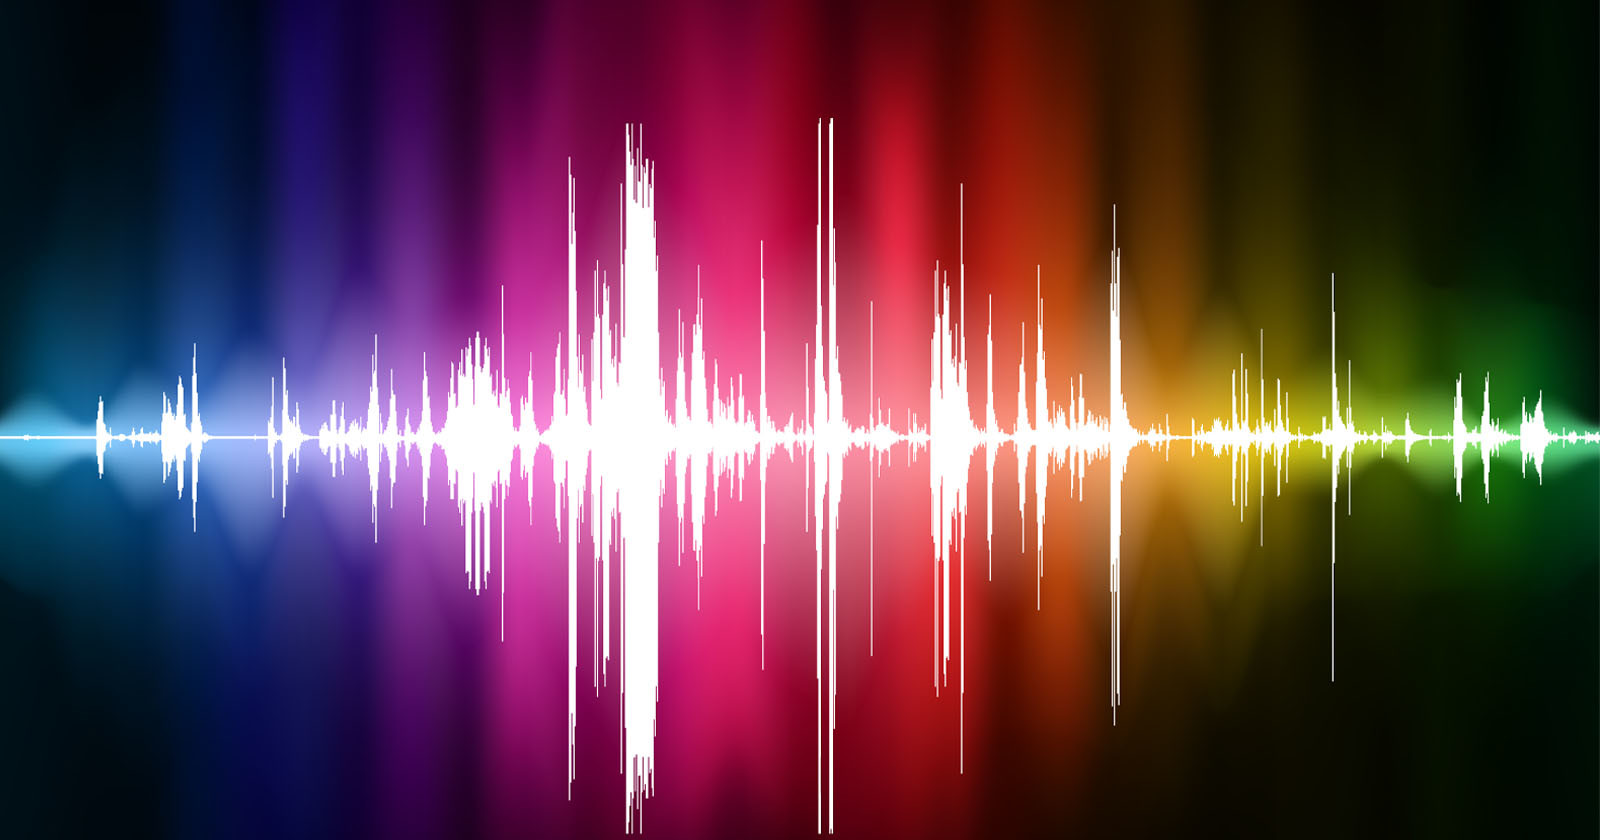 Scientists Use Cameras to Recreate Sounds by ‘Seeing’ Vibrations